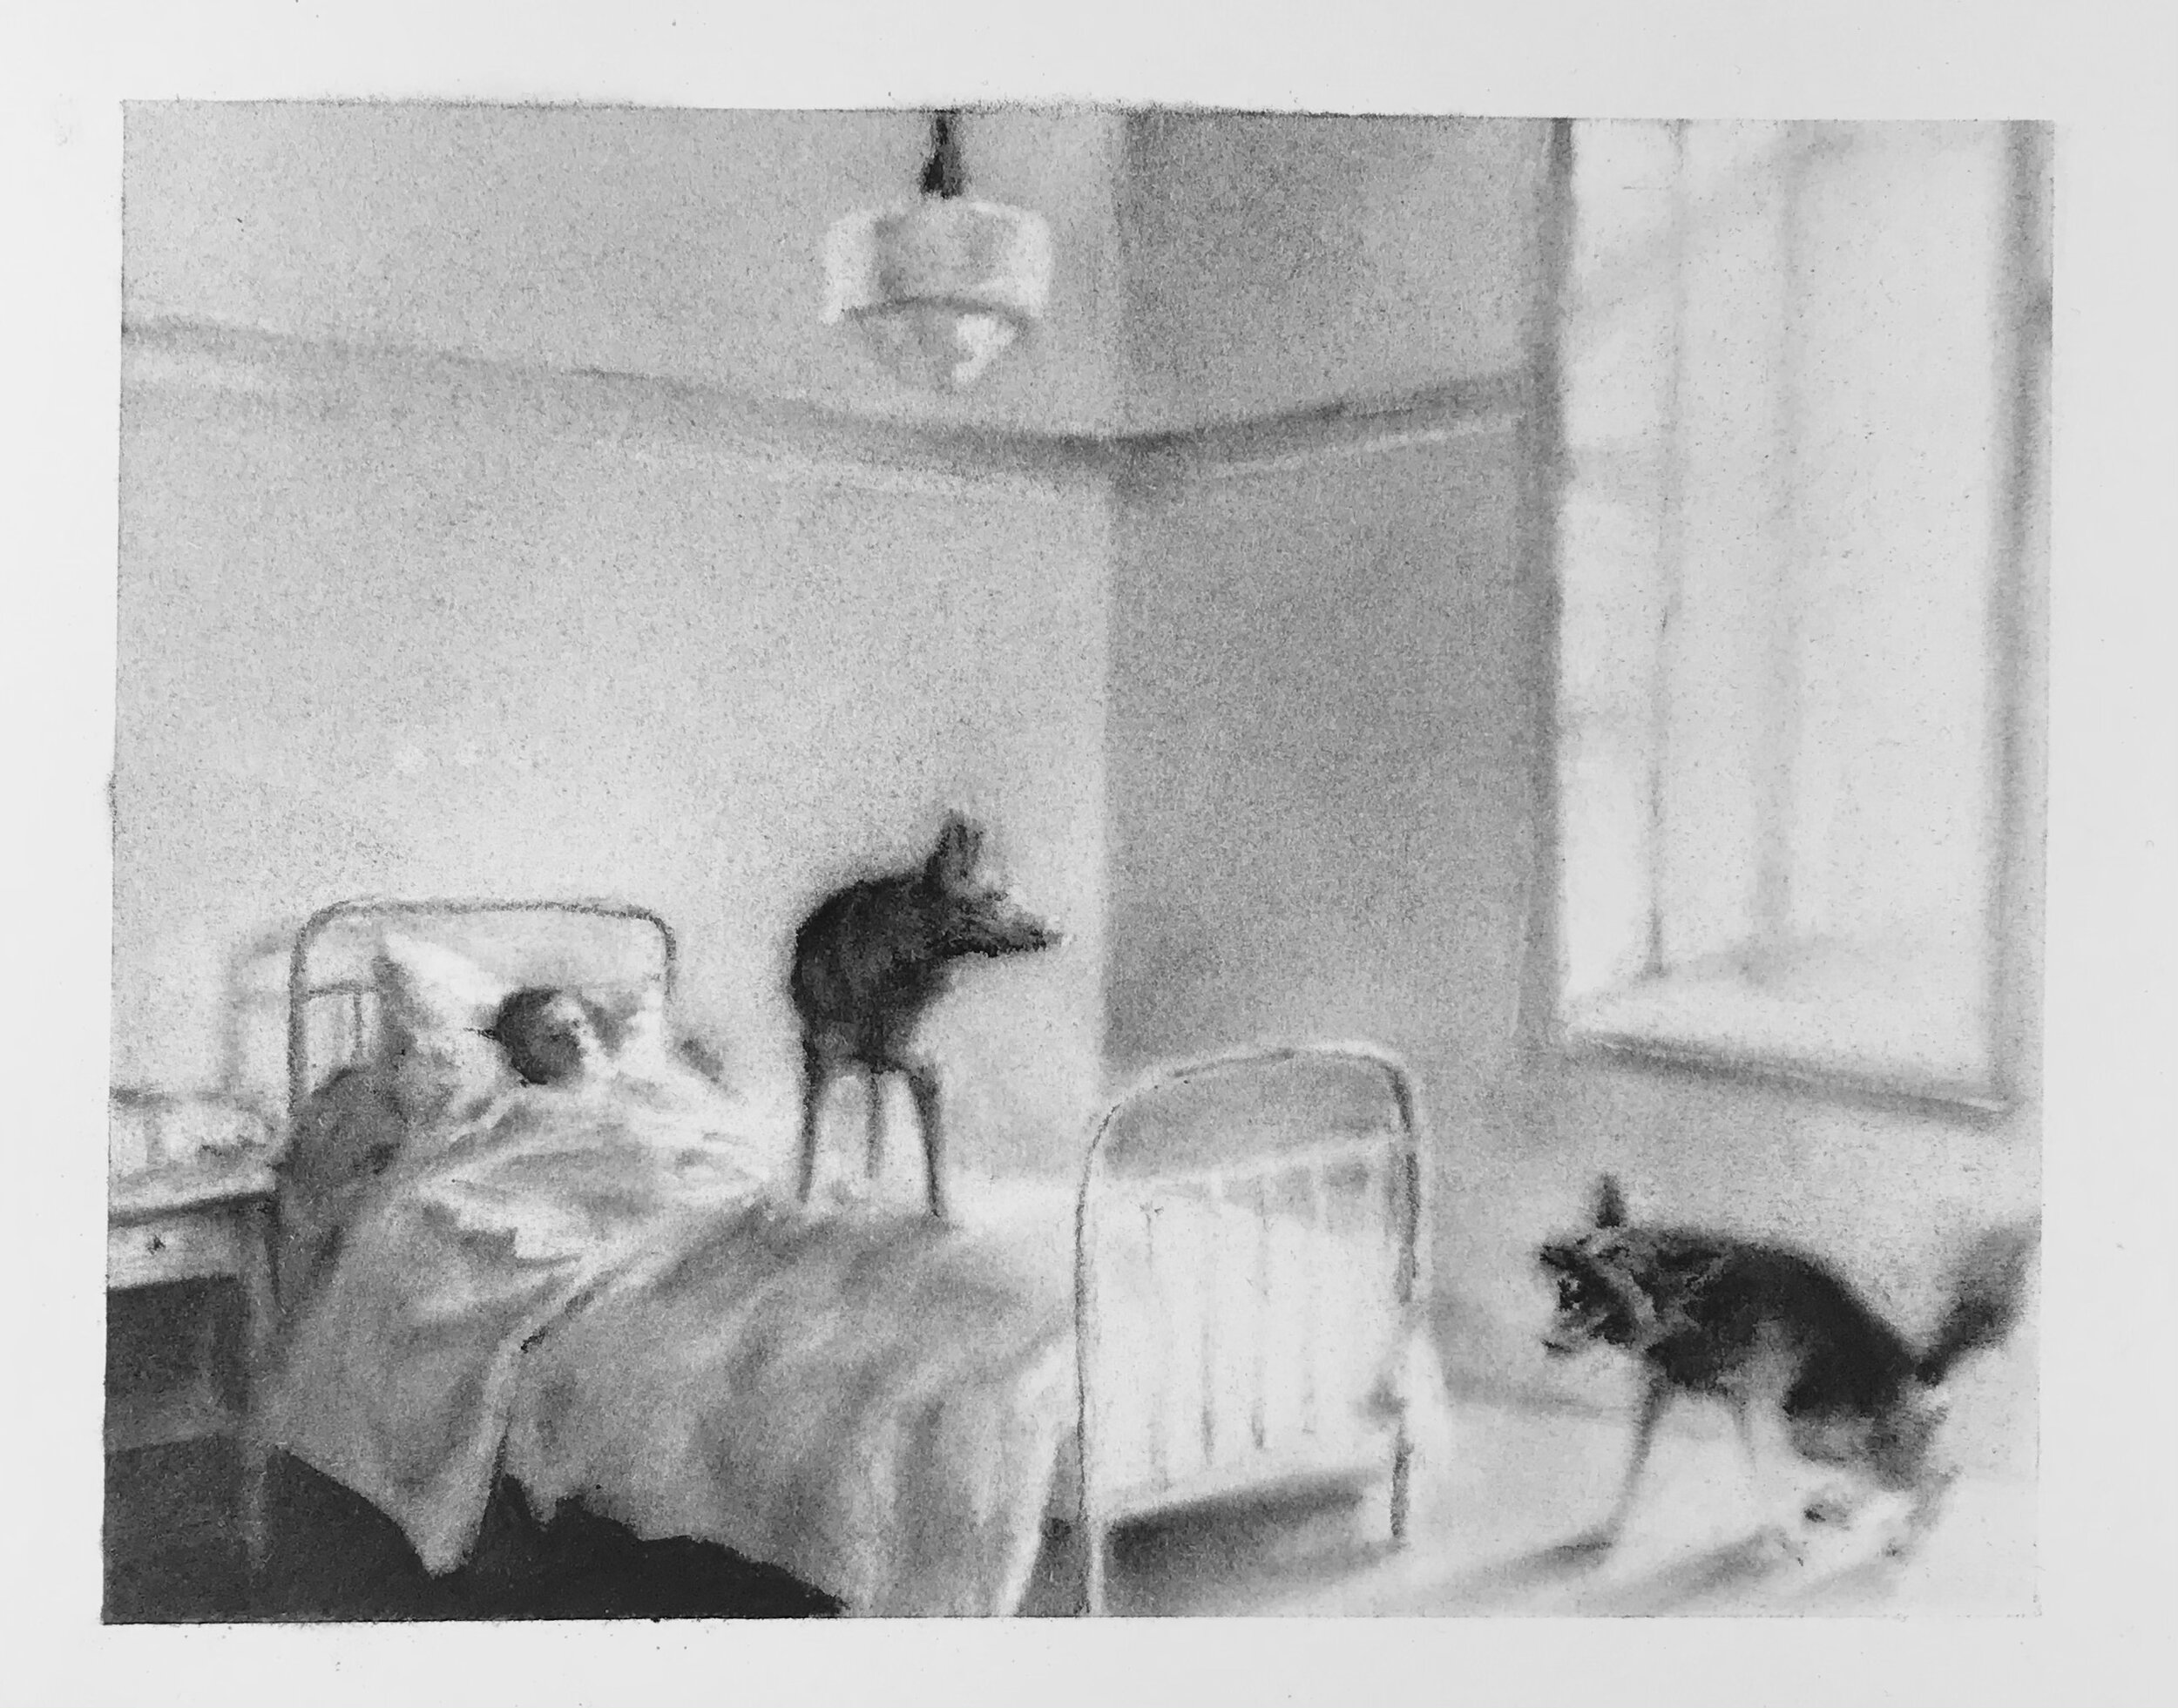 HOSPITAL SCENE (PATIENT WITH POLICE DOGS)